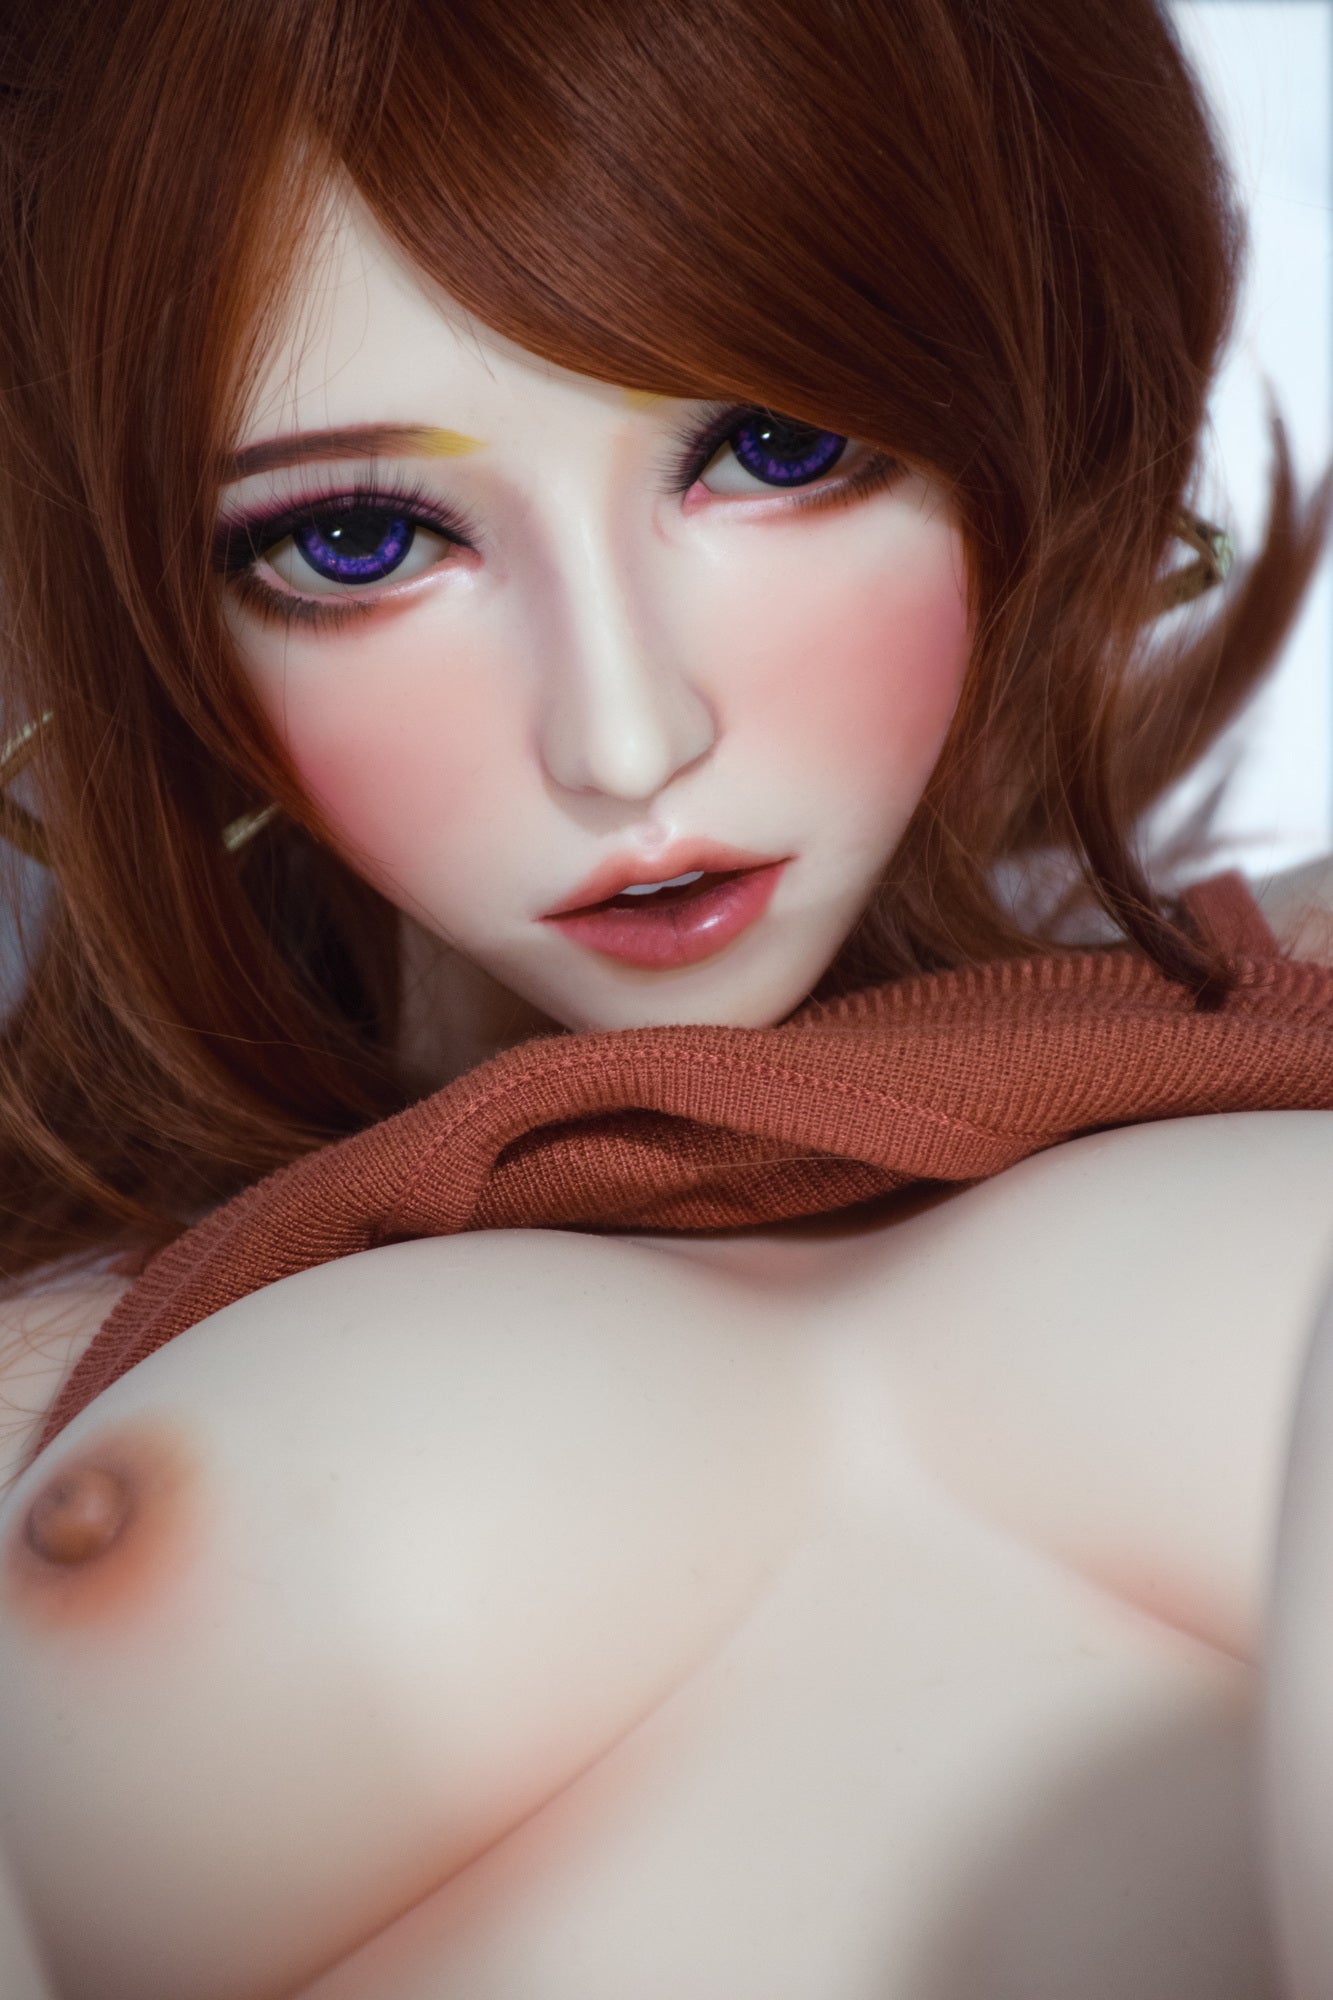 ElsaBabe 150cm Big Breasts Platinum Silicone Sex Doll Anime Figure Body Real Solid Erotic Toy With Metal Skeleton, Chiba Madoka